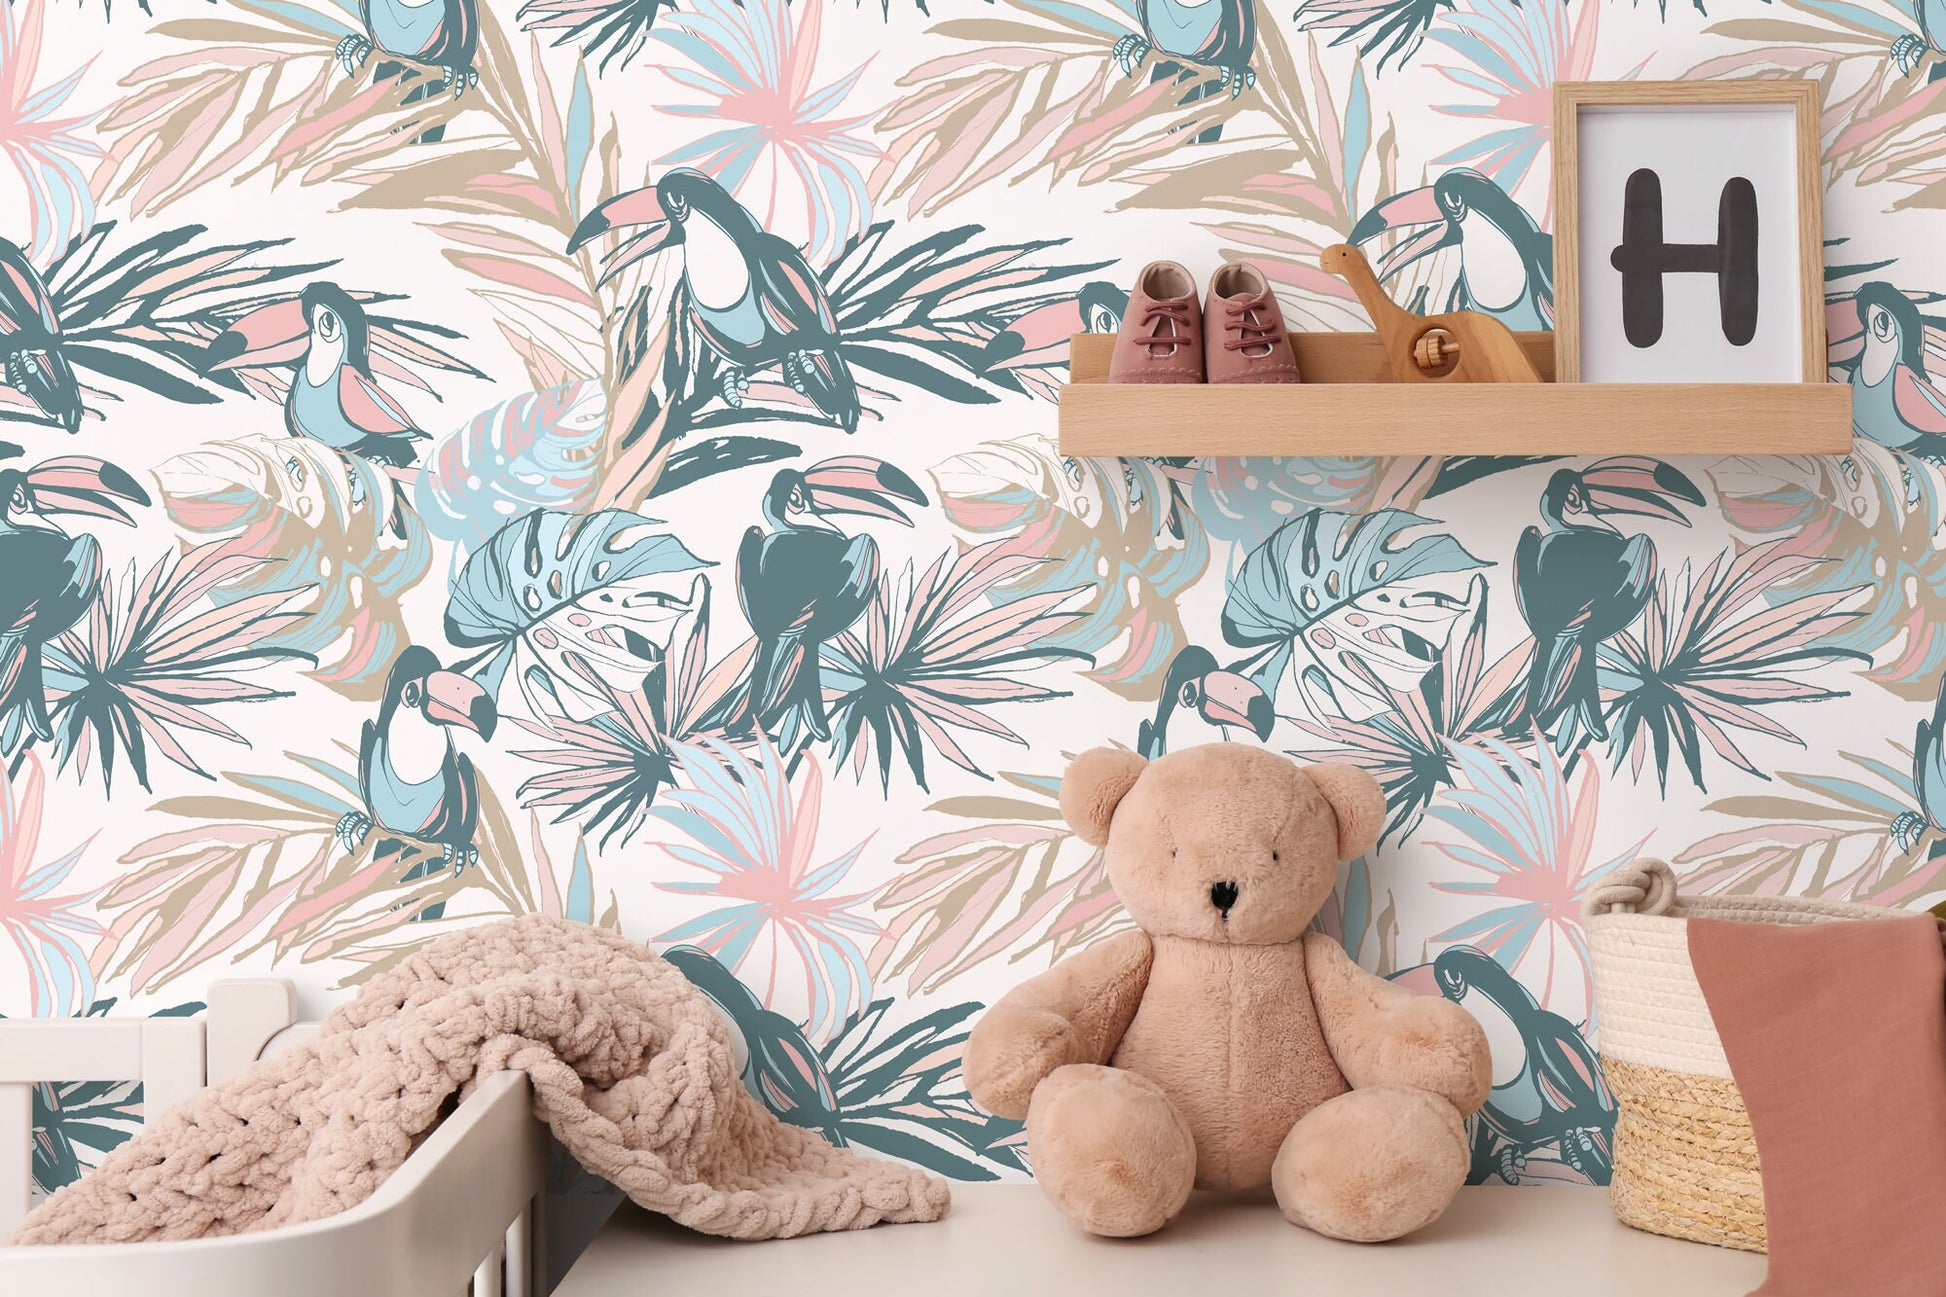 Toucan Tropical Colorful Wallpaper - Removable Wallpaper Peel and Stick Wallpaper Wall Paper Wall - B249